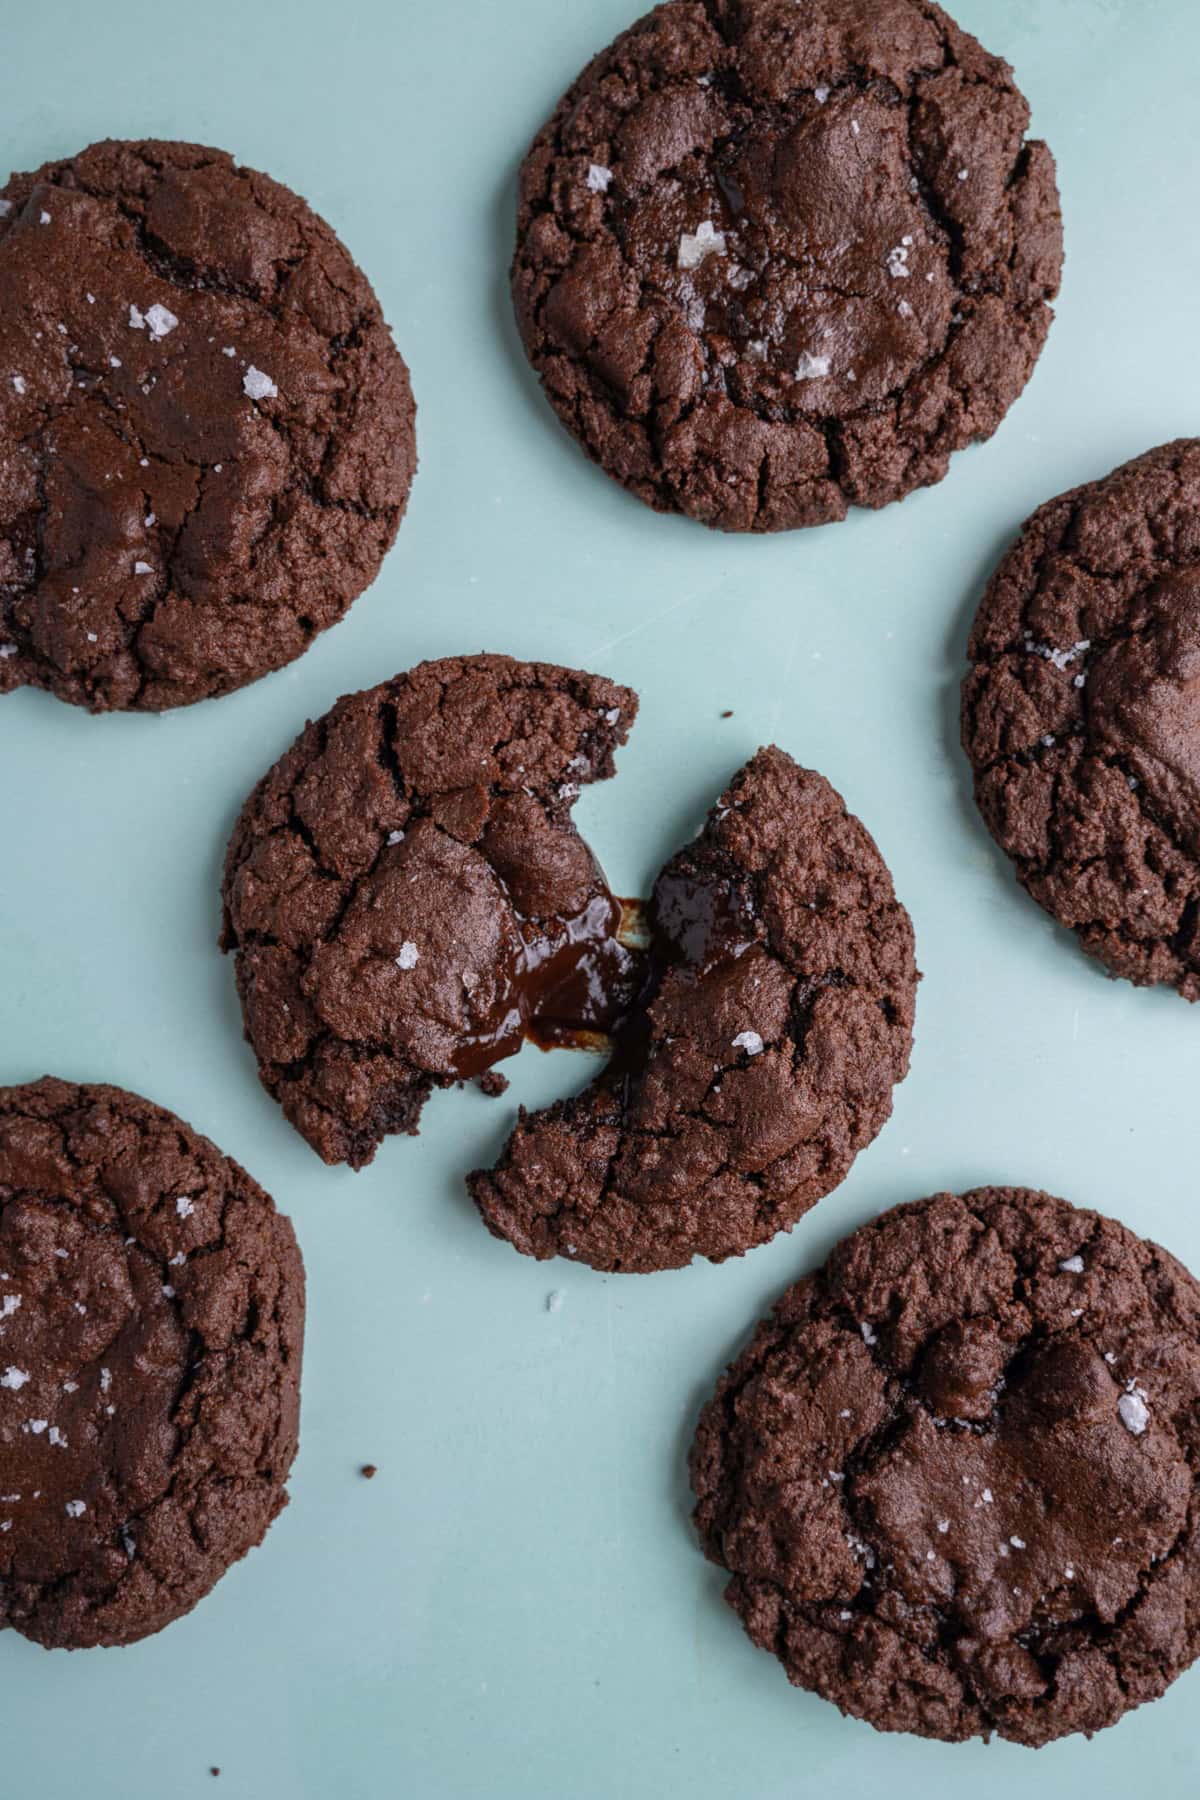 Overhead image of chocolate fudge cookies with middle one pulled apart to reveal molten chocolate center.